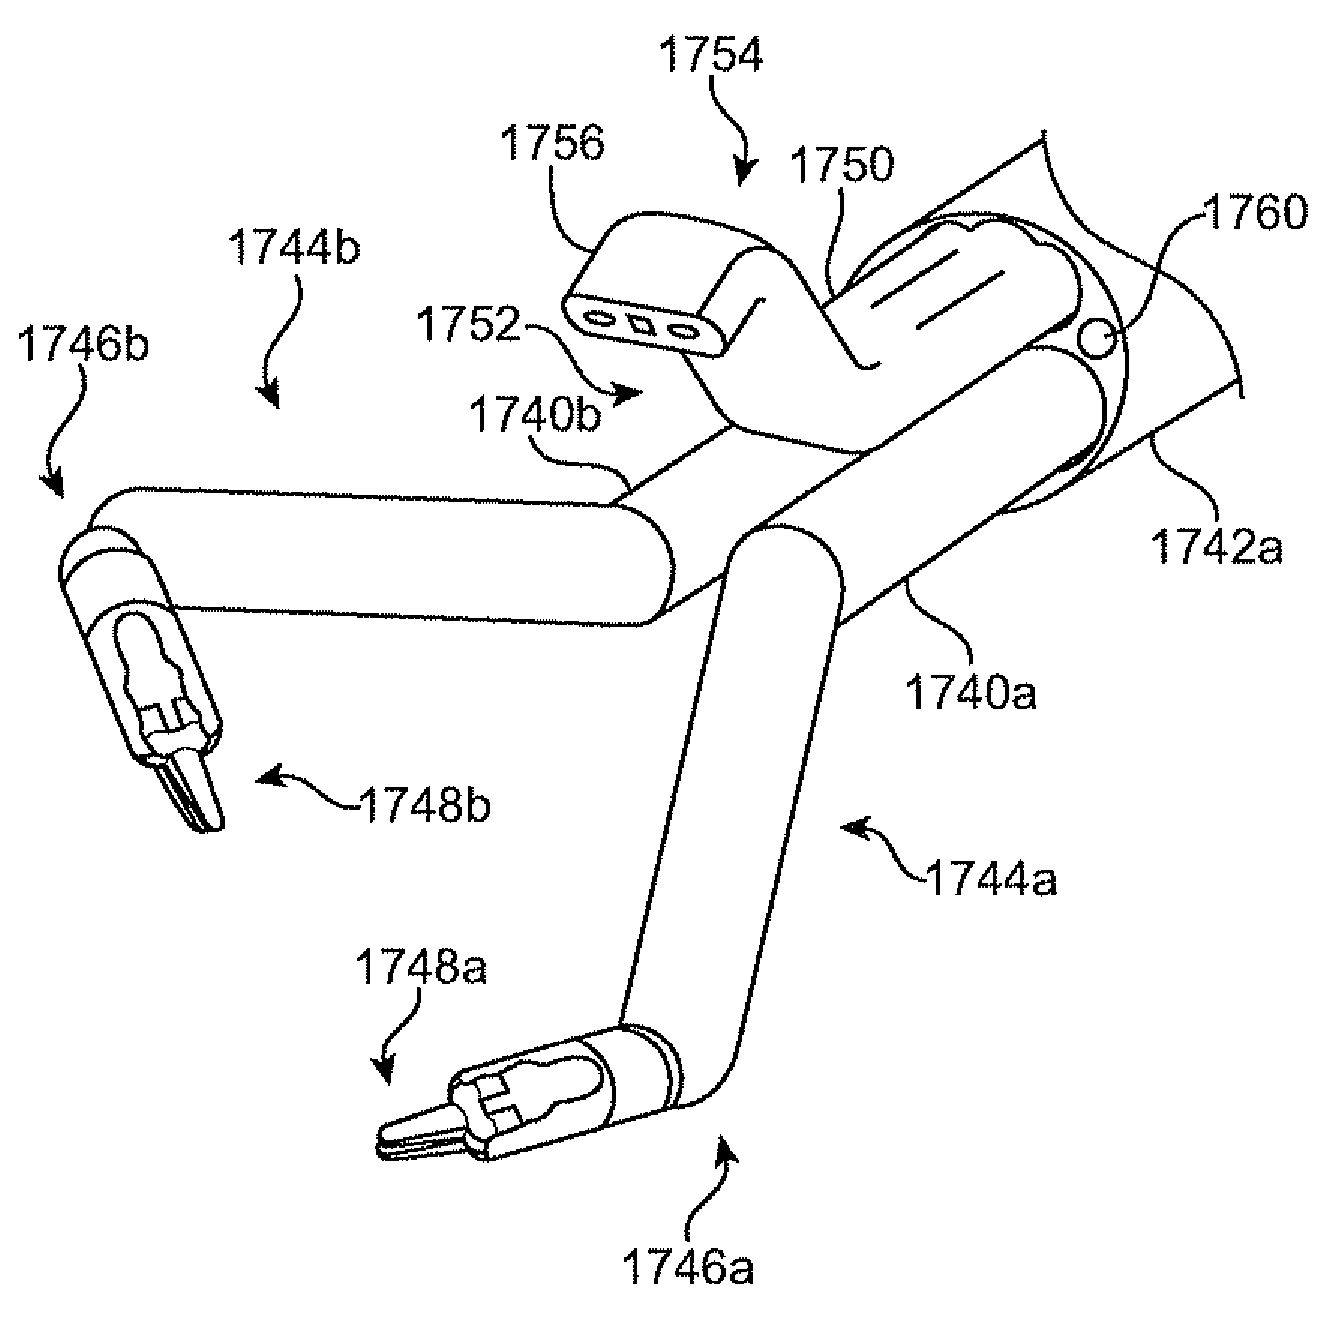 Minimally invasive surgical apparatus with side exit instruments